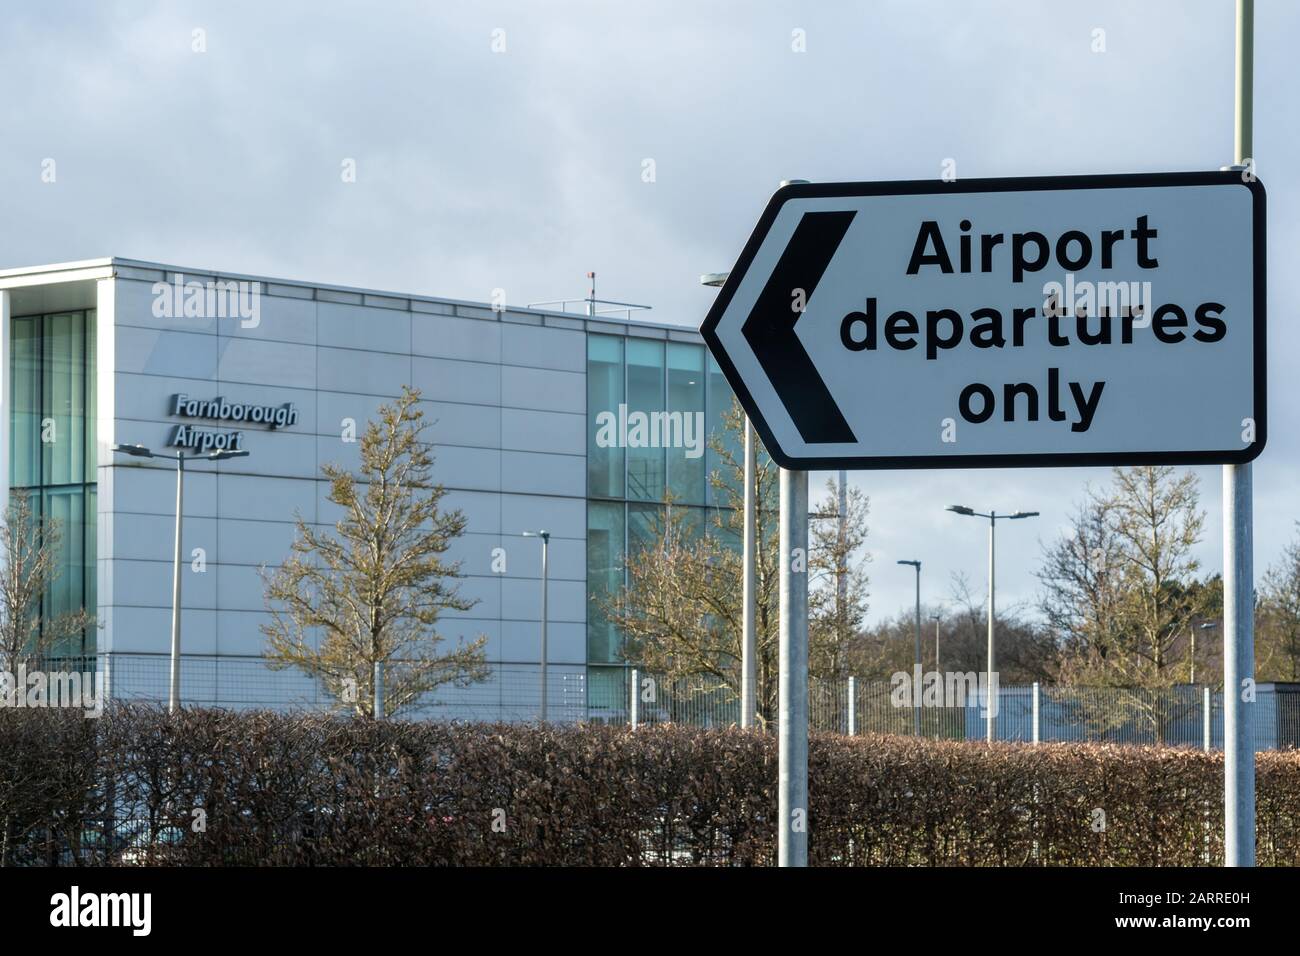 Farnborough Airport, Farnborough, Hampshire, UK, with airport departures only road sign Stock Photo